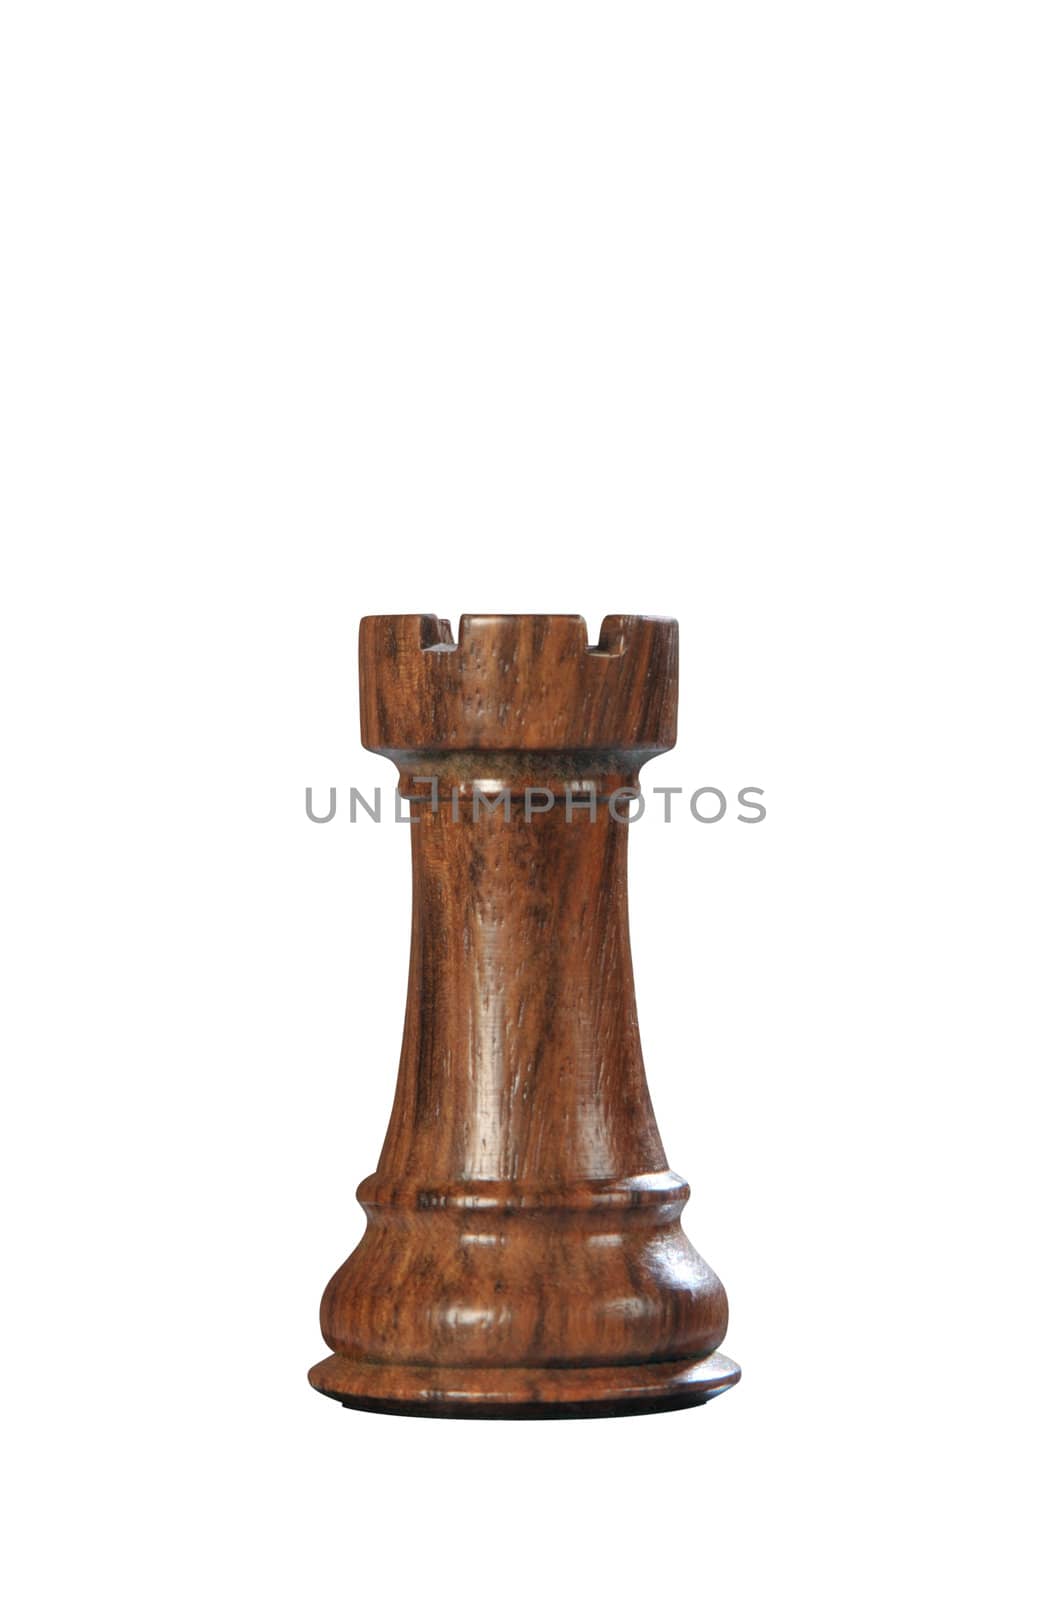 Black (Brown) wooden tower - one of 12 different chess pieces.